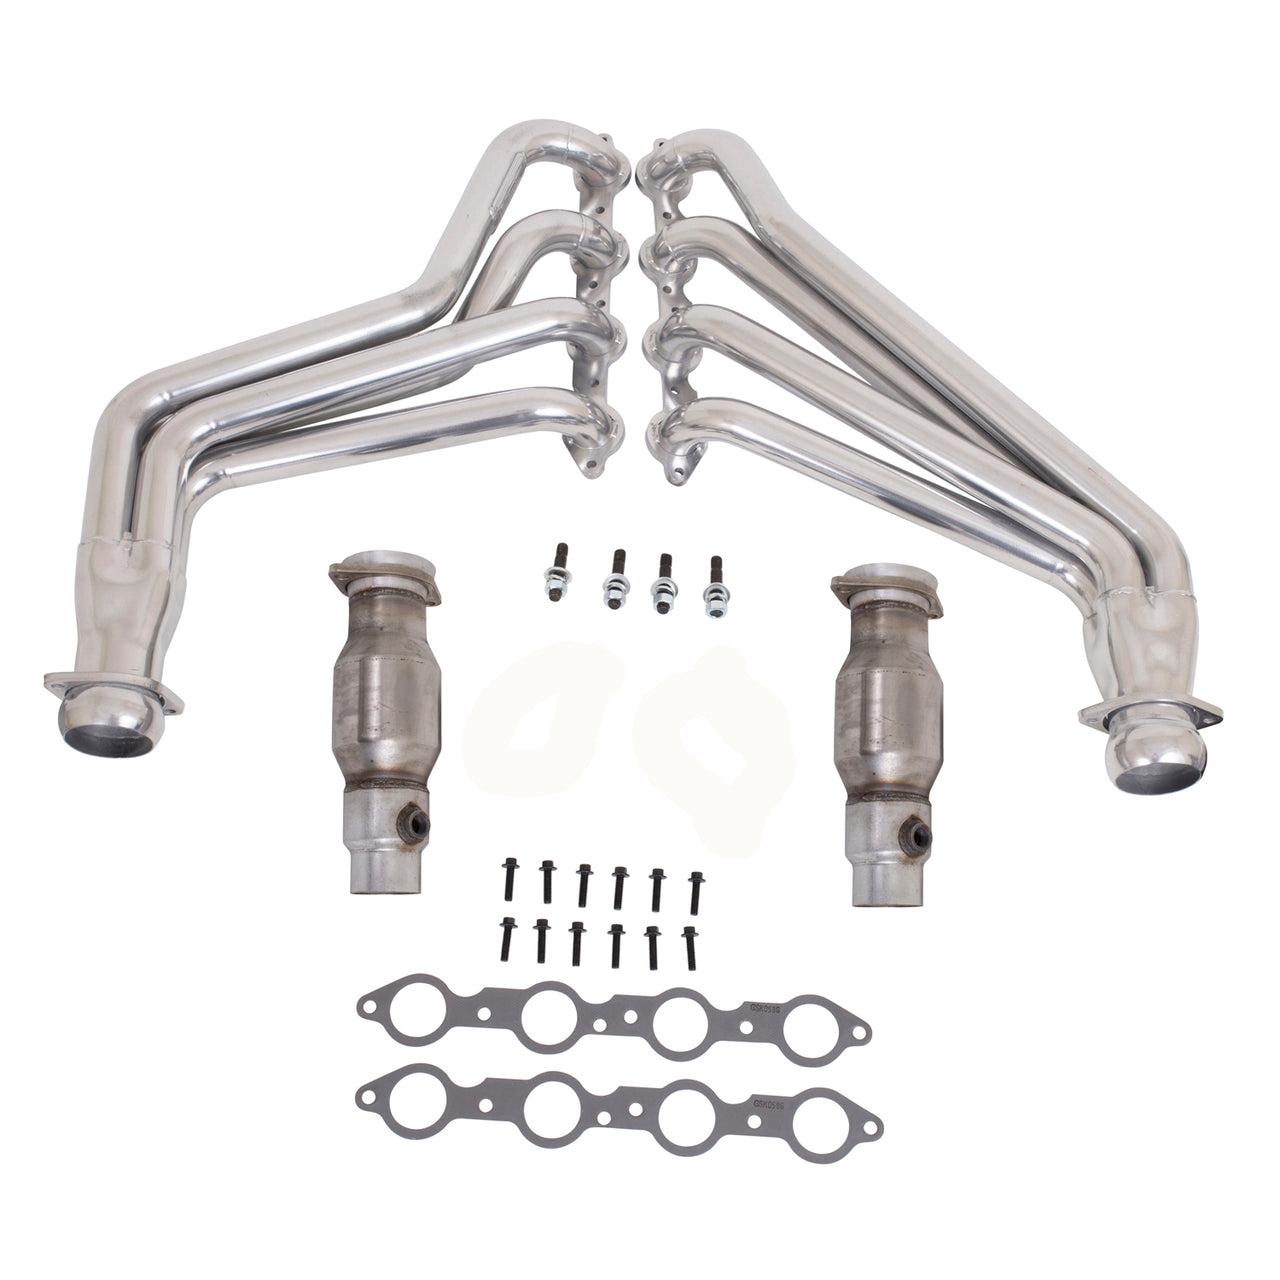 2010-2015 CAMARO LS3/L99 1-3/4 LONG TUBE HEADERS W/CATS SYSTEM (POLISHED SILVER CERAMIC)